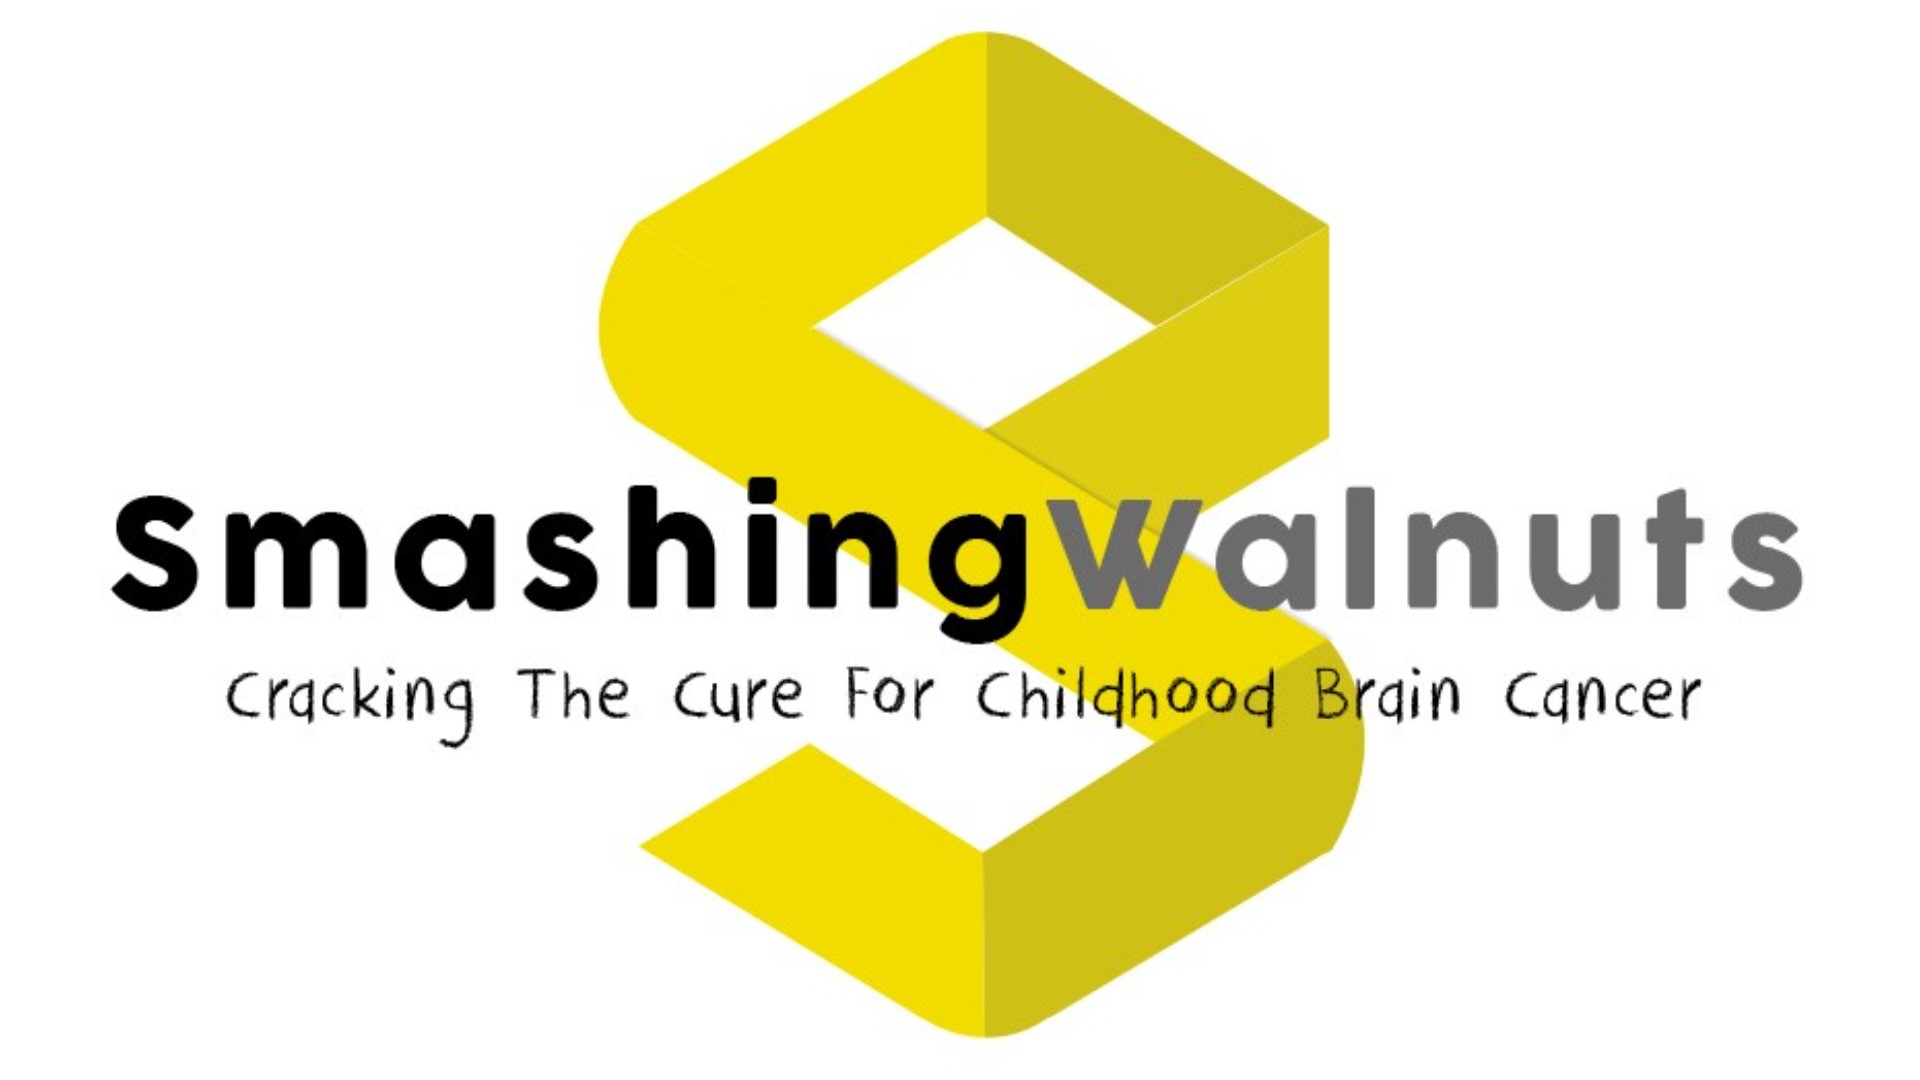 Ellyn Miller founded Smashing Walnuts after losing her daughter to child brain cancer. The nonprofit works to raise awareness and funding to end childhood cancer.